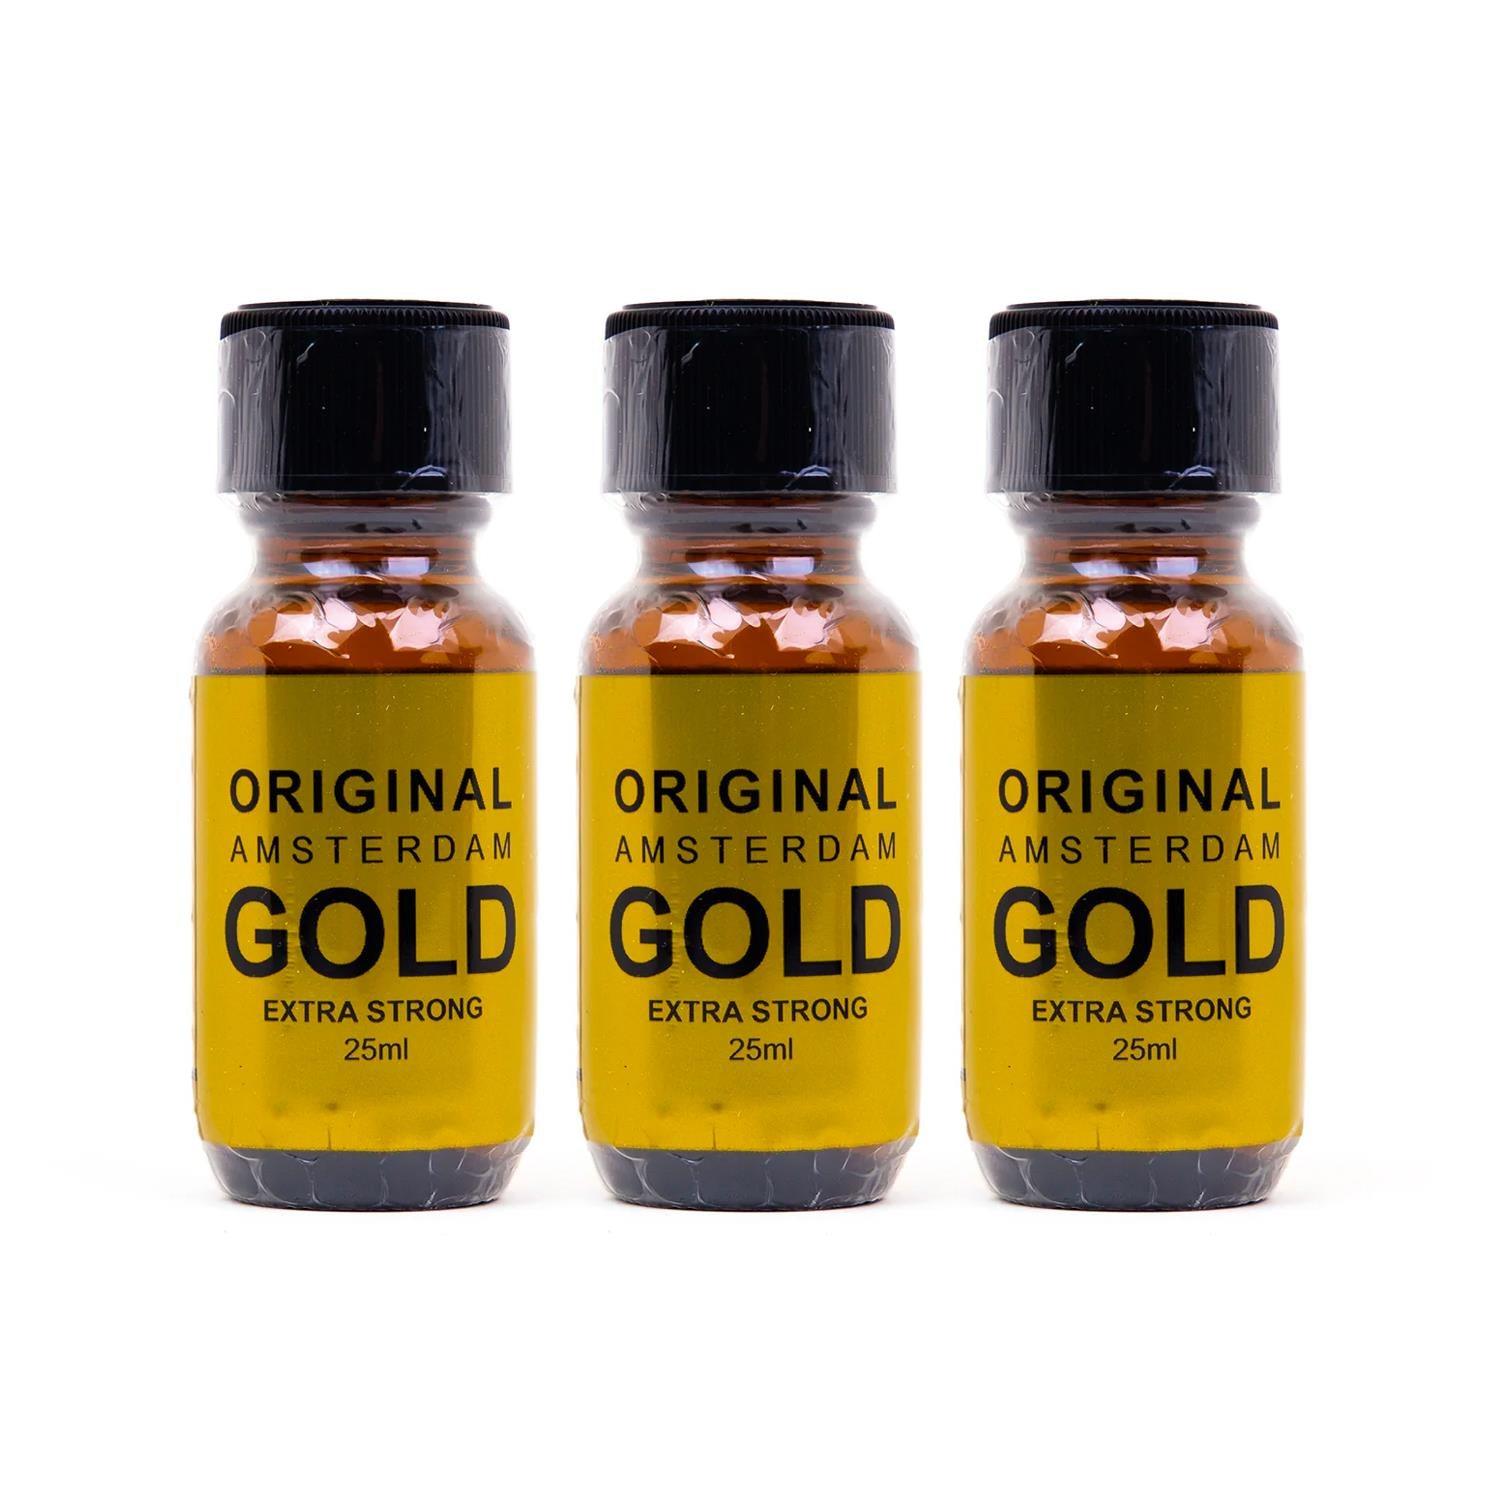 Original Amsterdam Gold, Extra Strong, 25ml, 3-Pack by REGULATION Poppers